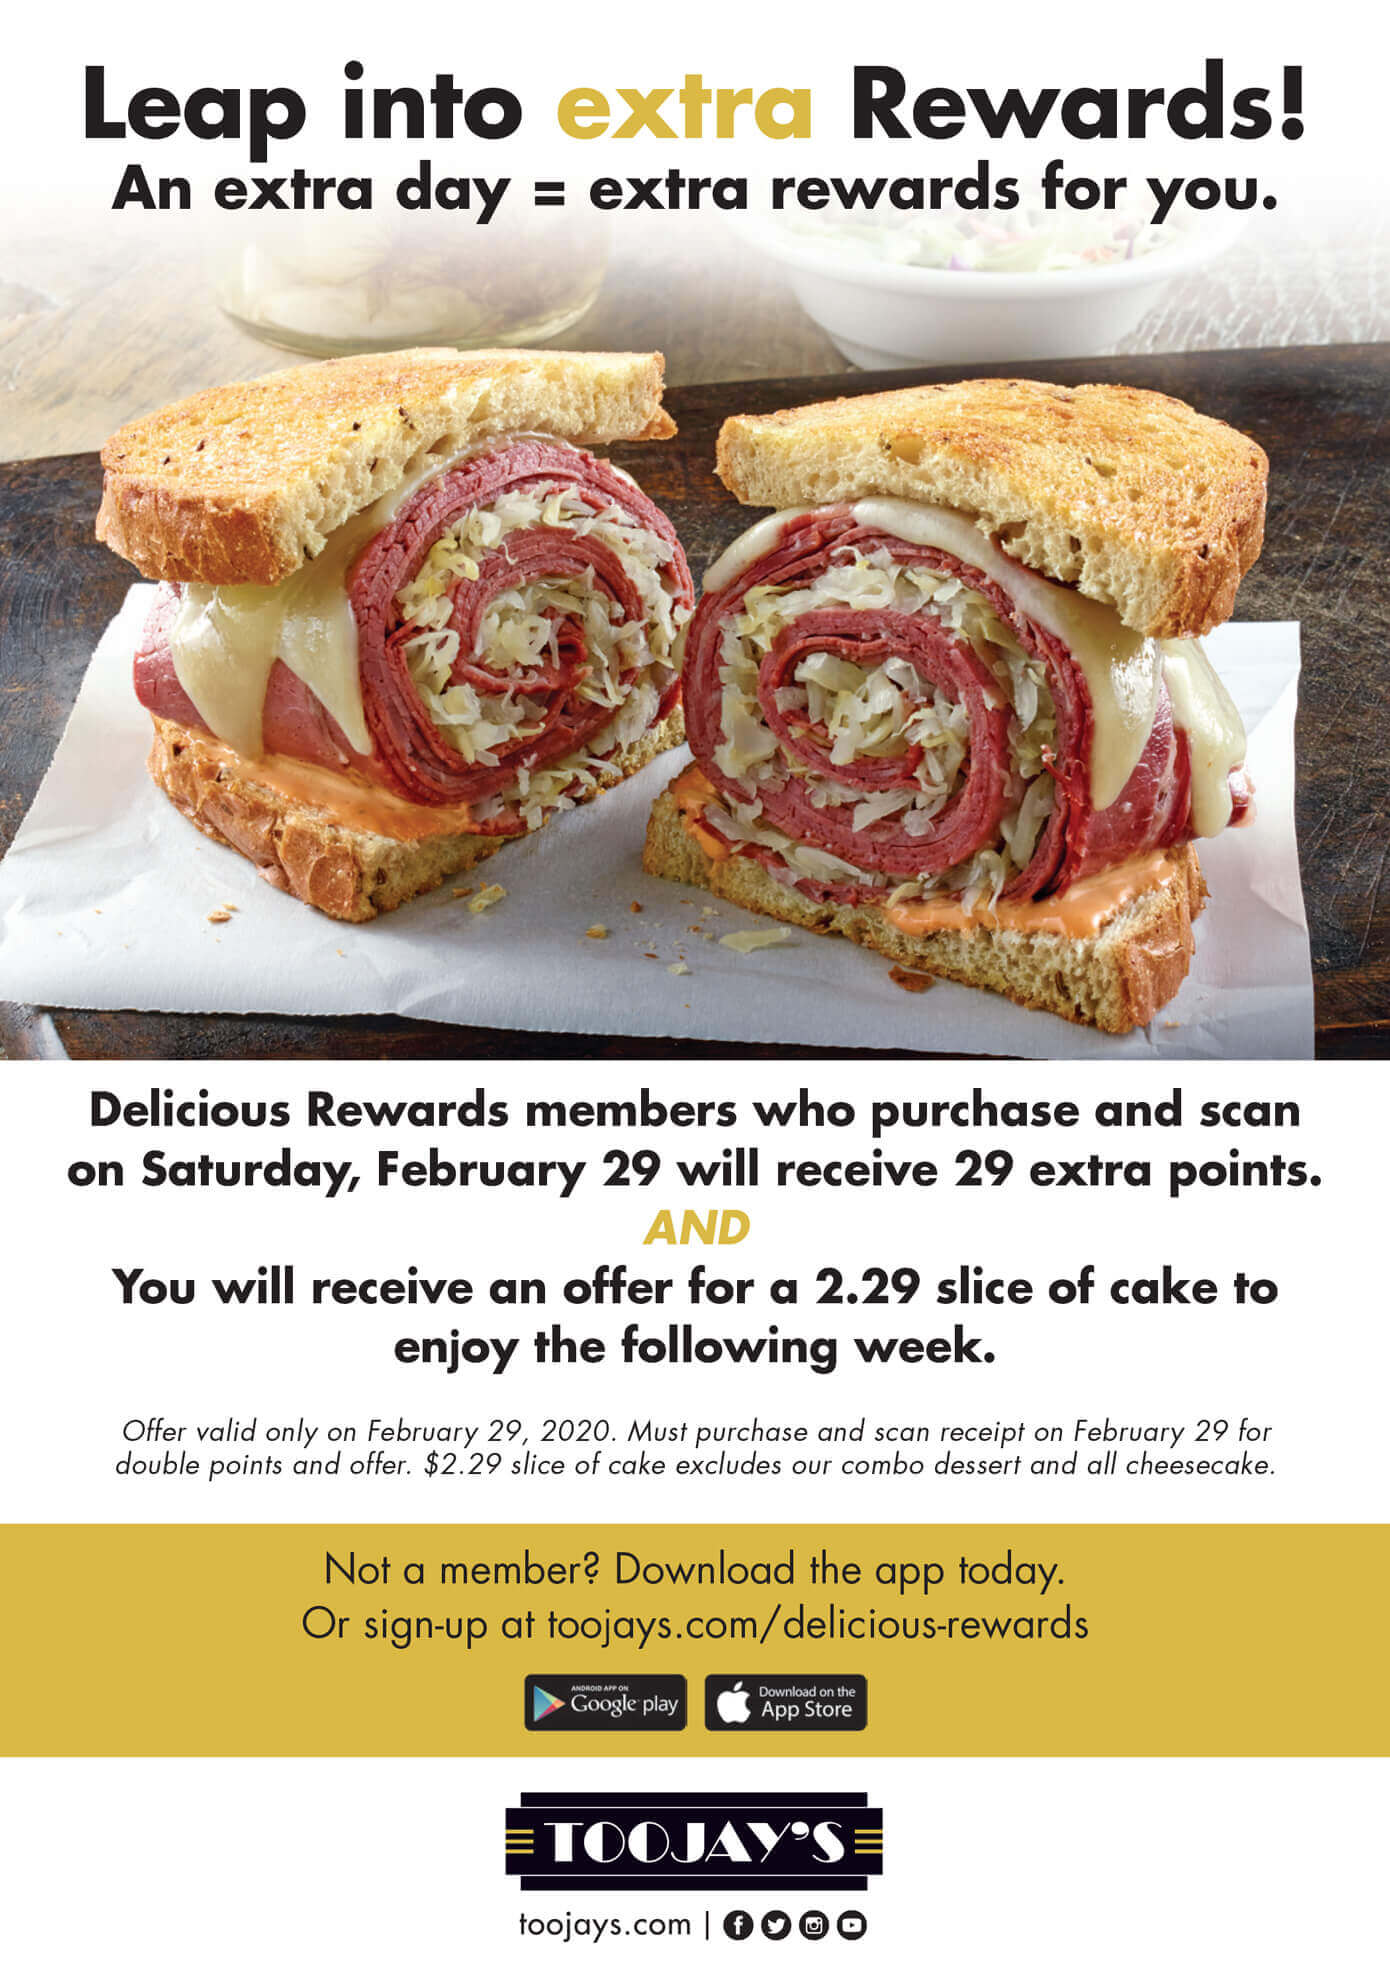 Leap into Extra Rewards! An extra day = extra rewards for you. Delicious Rewards members who purchase an scan on Saturday, February 20 will receive 29 extra points AND You will receive an offer for a 2.29 slice of cake to enjoy the following week.